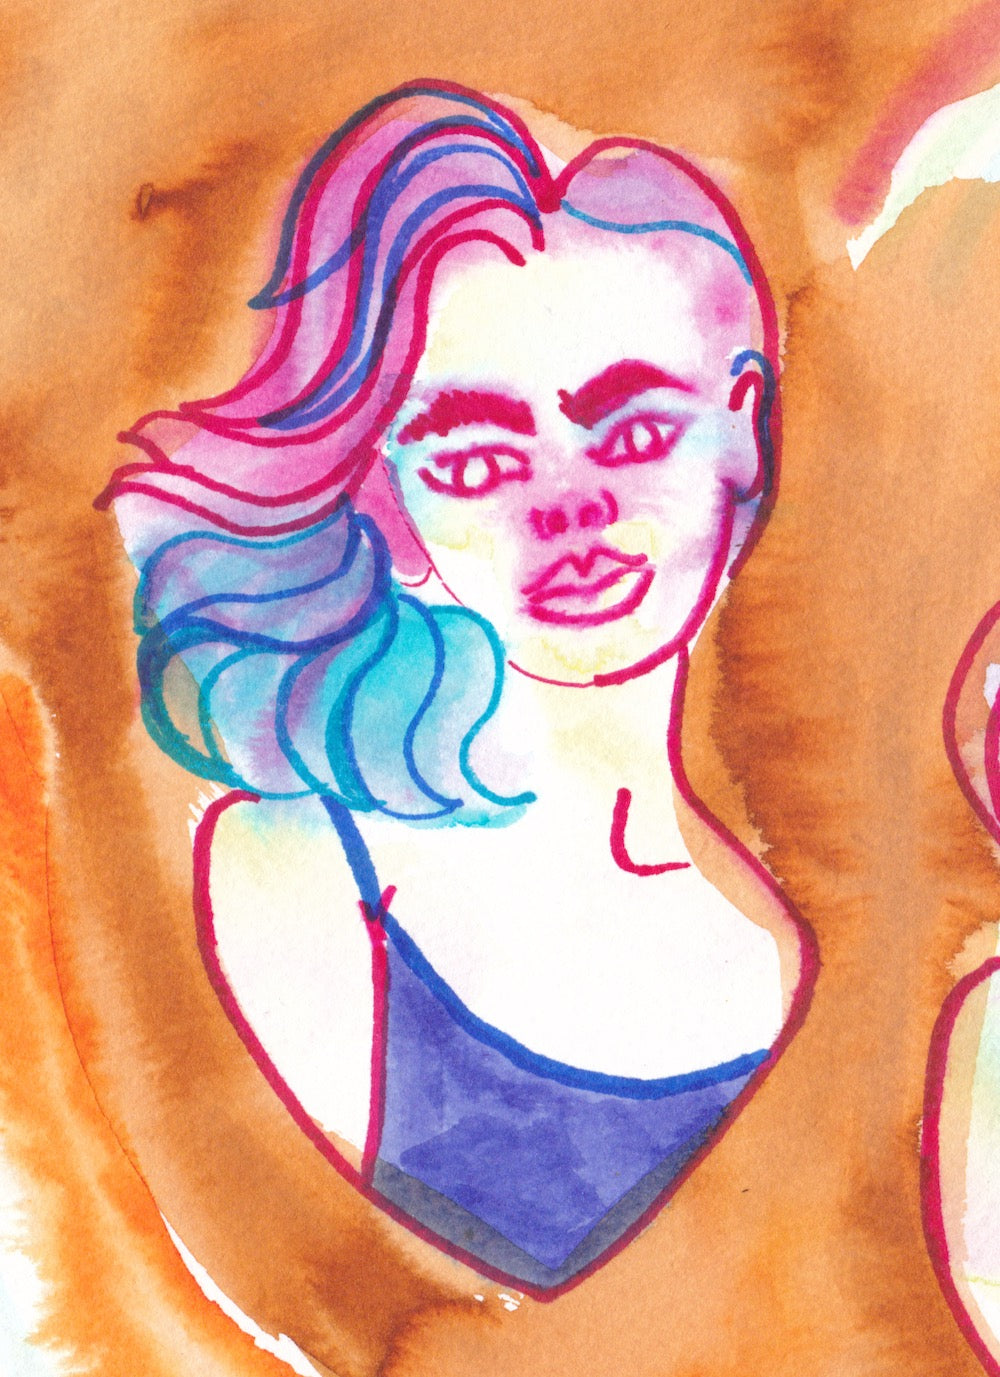 Close up of drawing of girl with pink and blue hair.